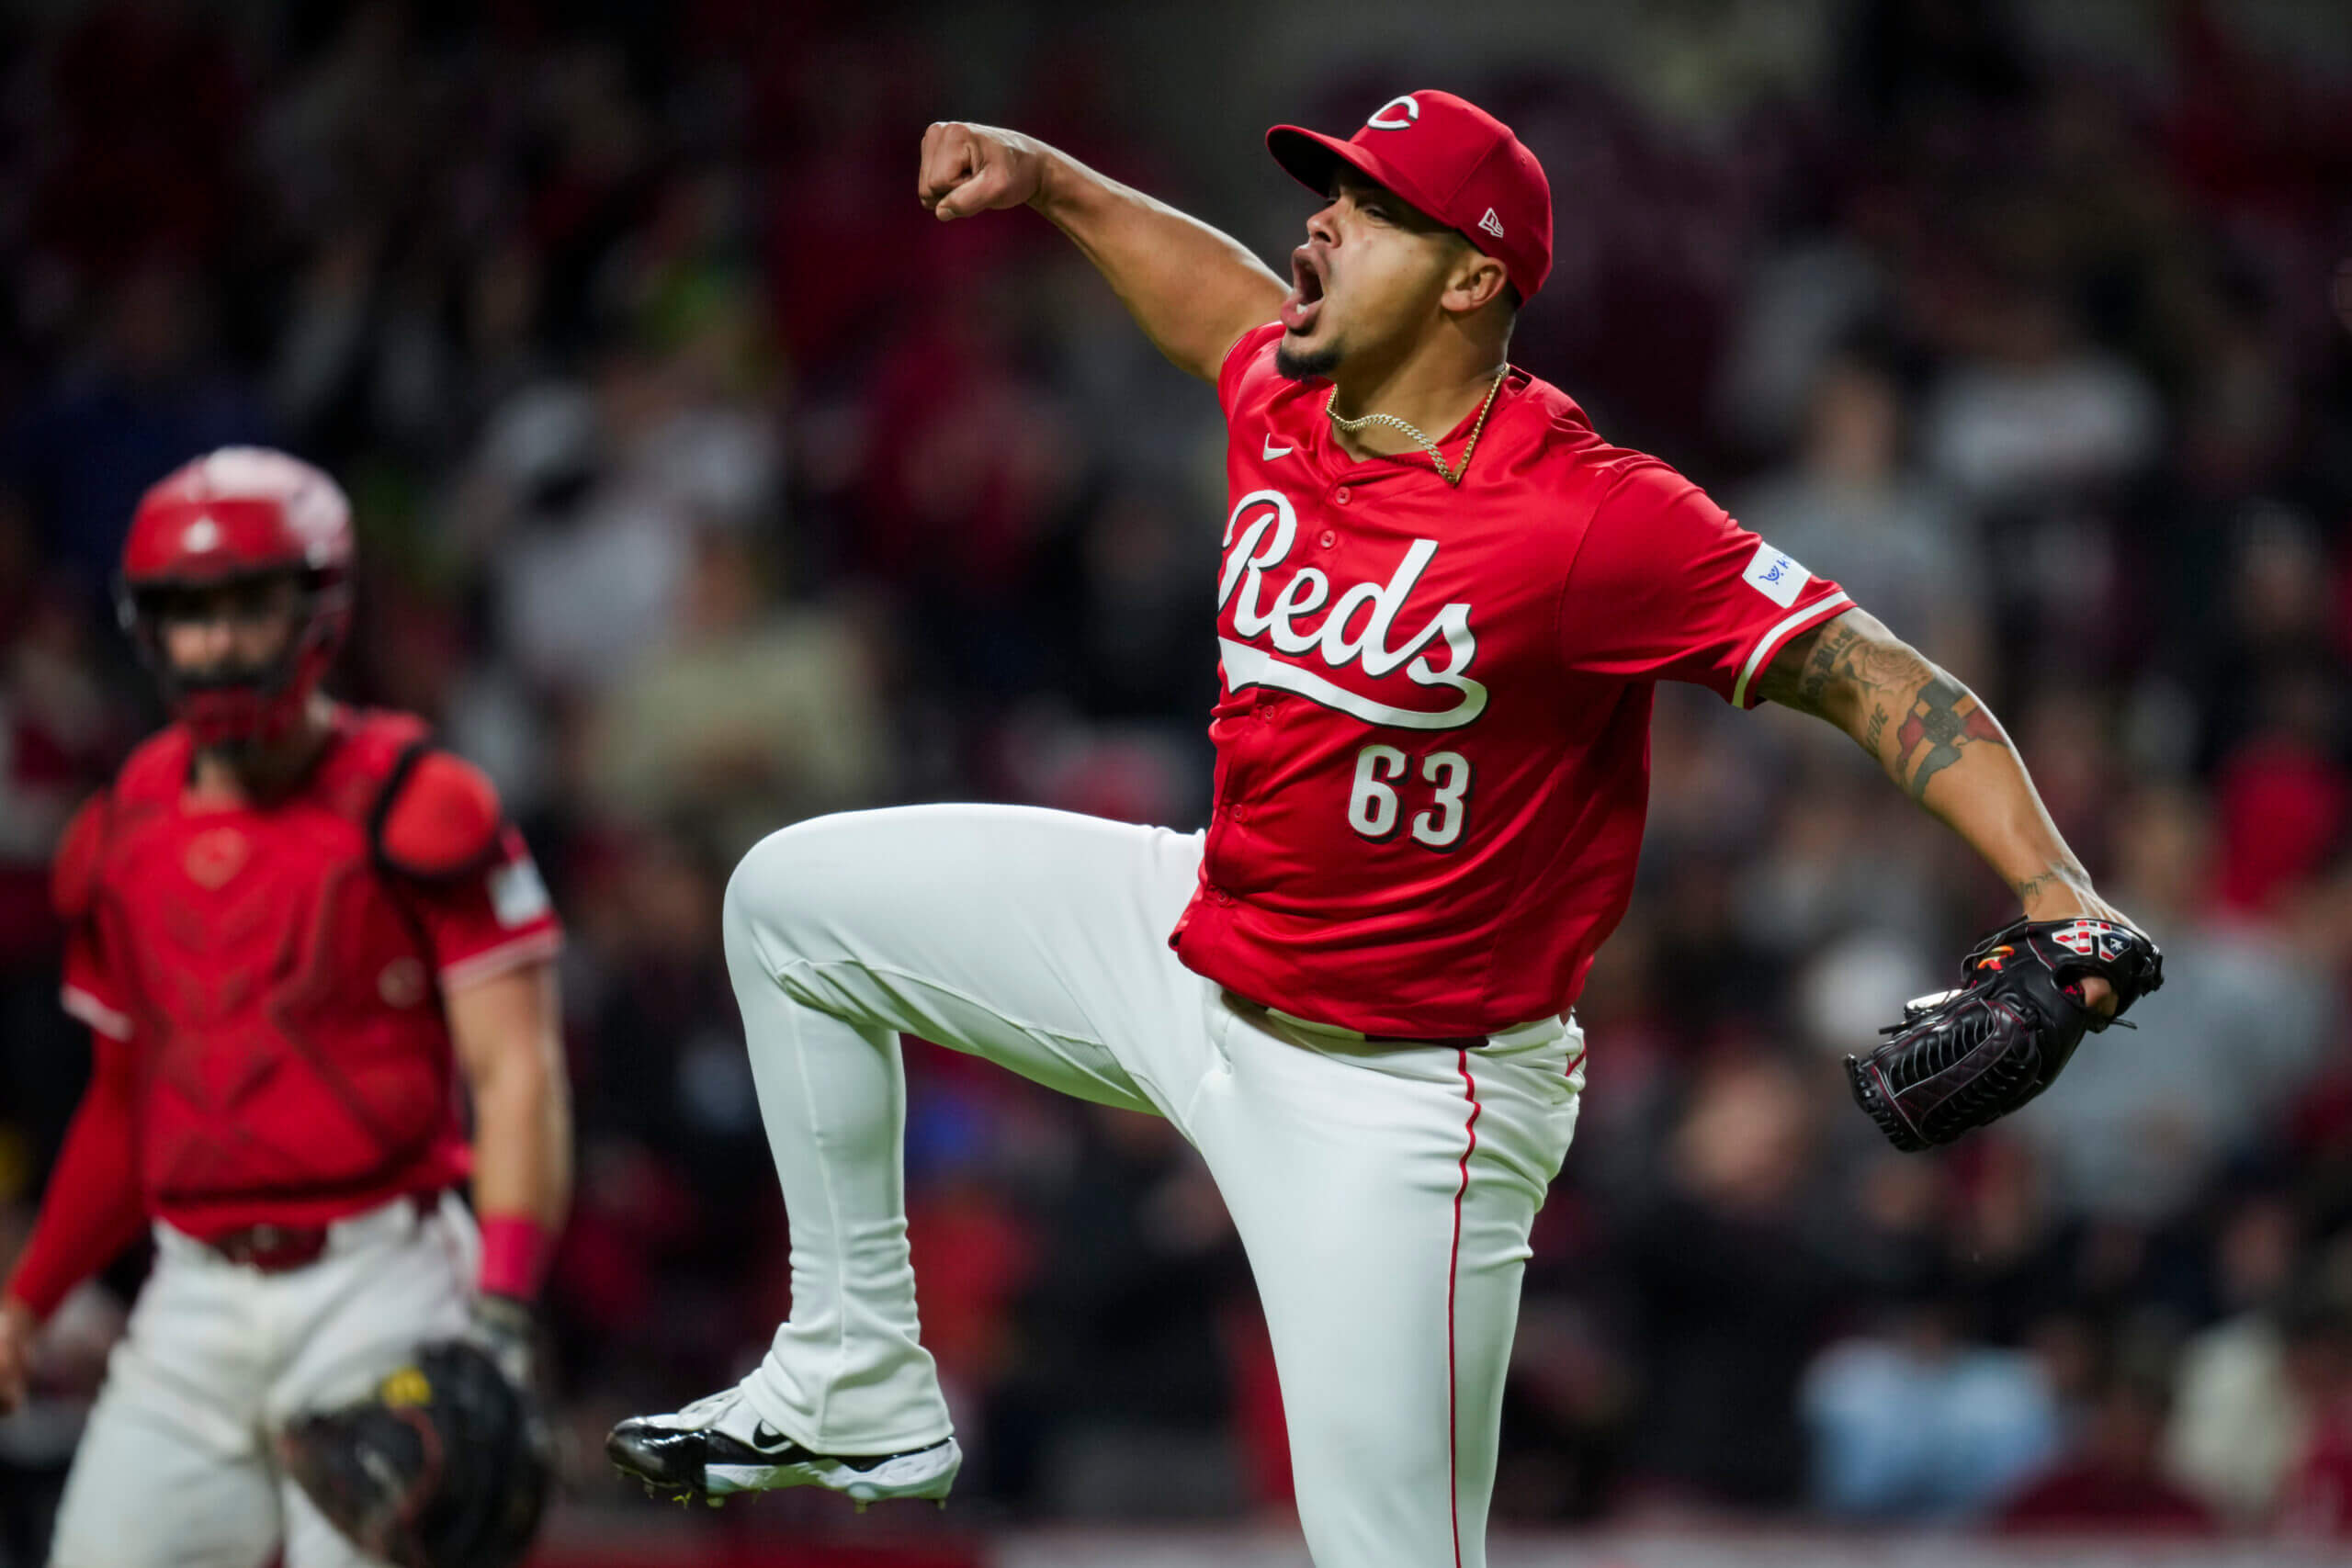 Reds reliever Fernando Cruz is more than his ‘gift from God’